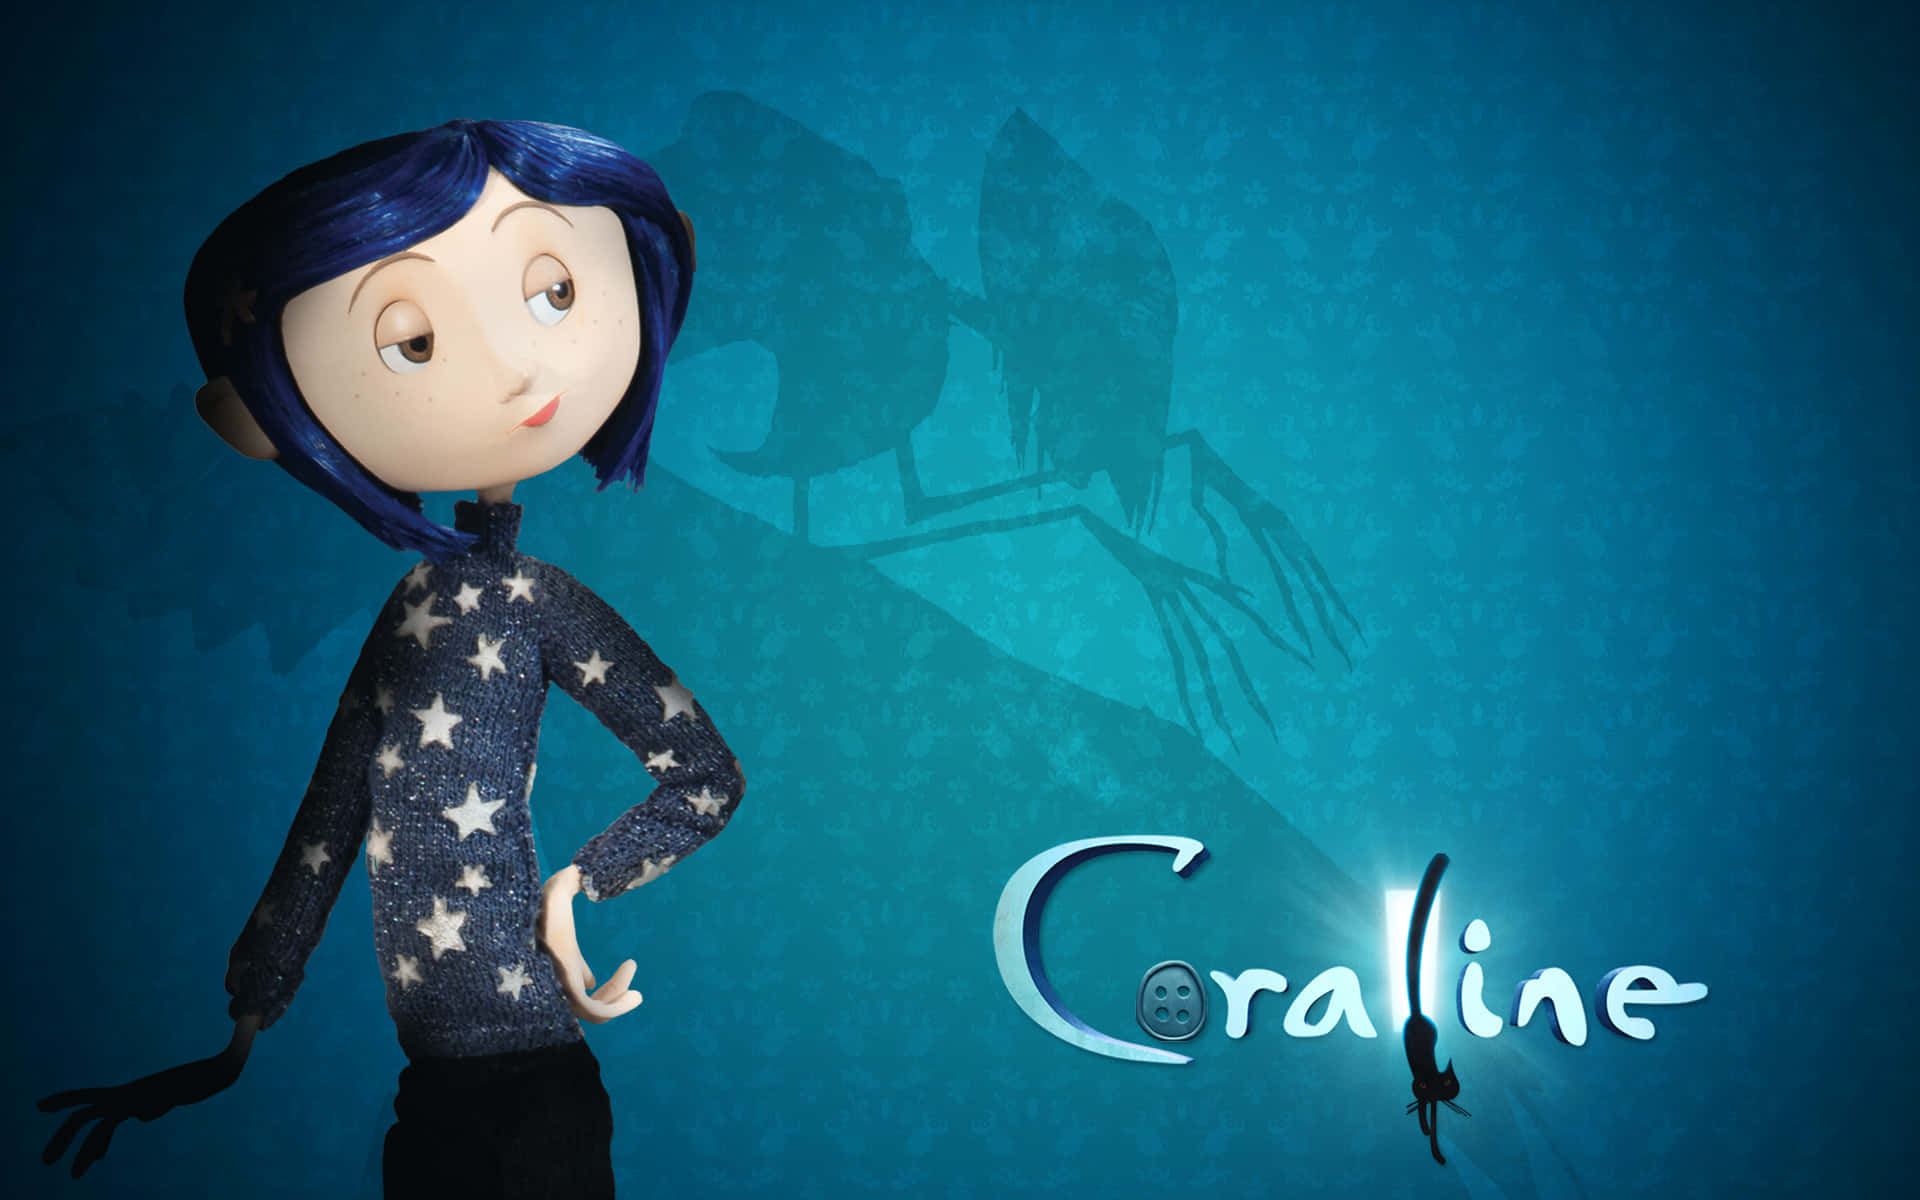 Be brave and persevere - Inspired by the brave Coraline